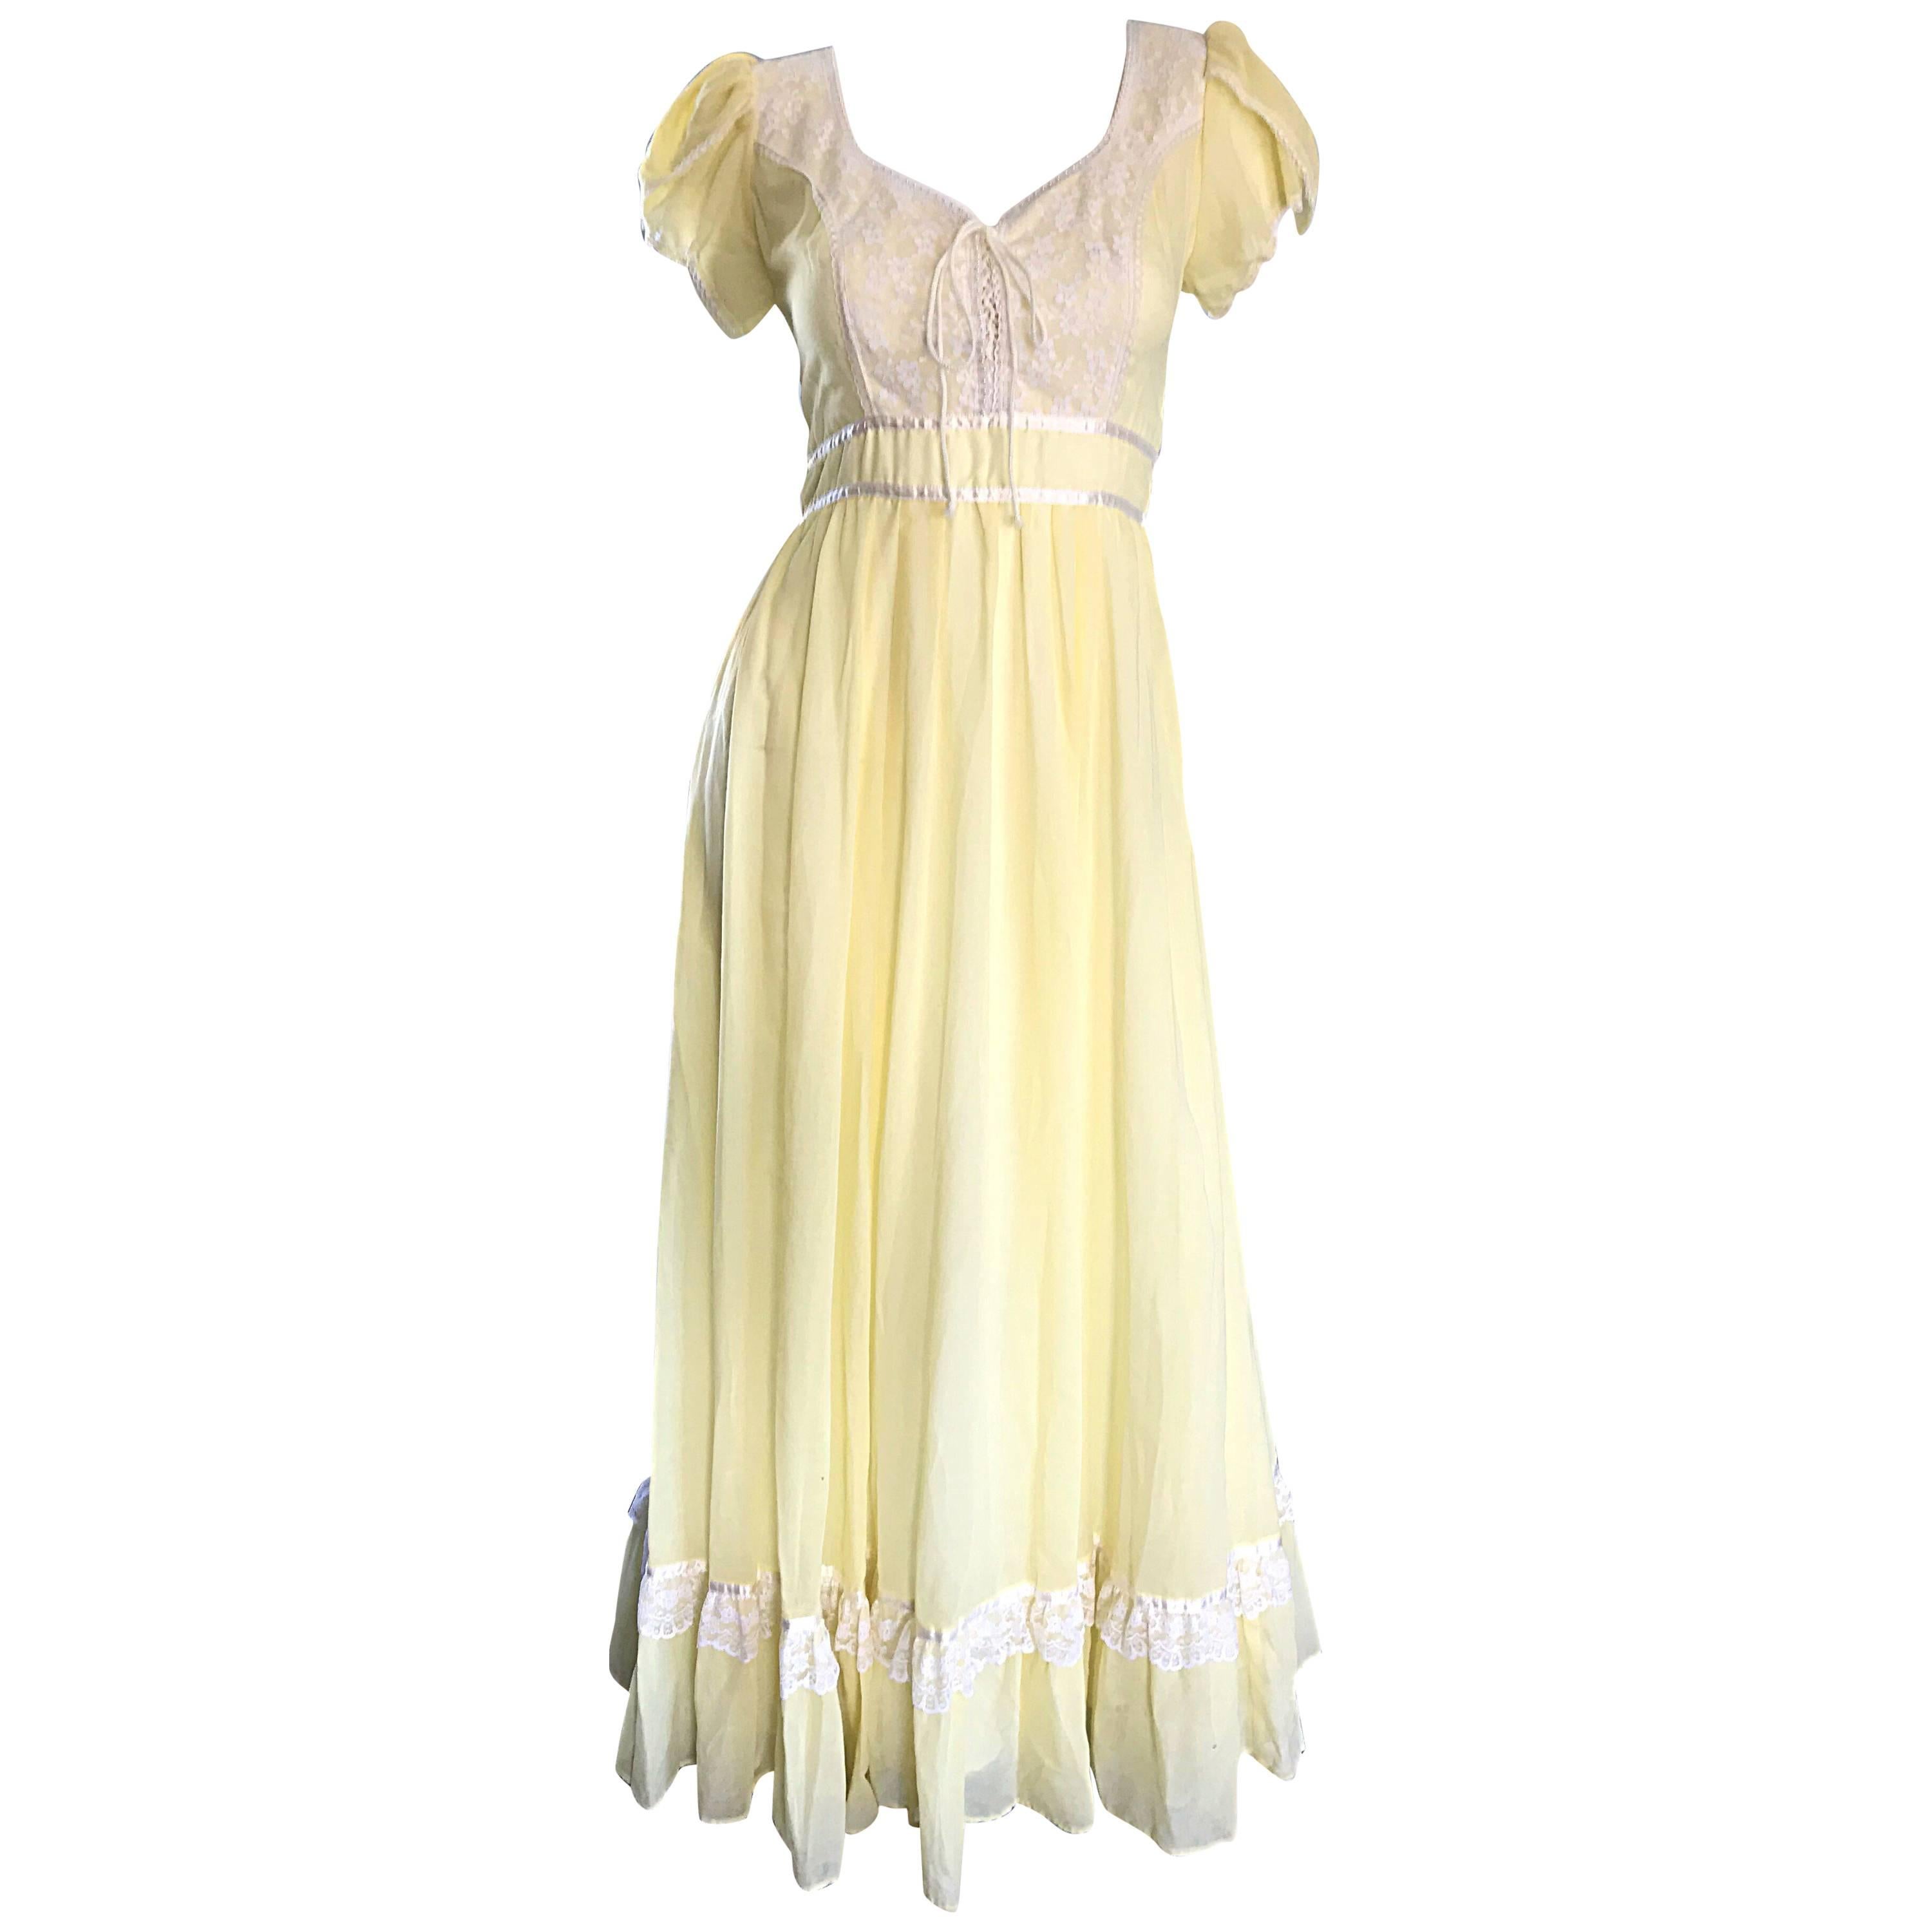 1970s Pale Yellow White Cotton Voile Pearl Encrusted Vintage 70s Boho Maxi Dress